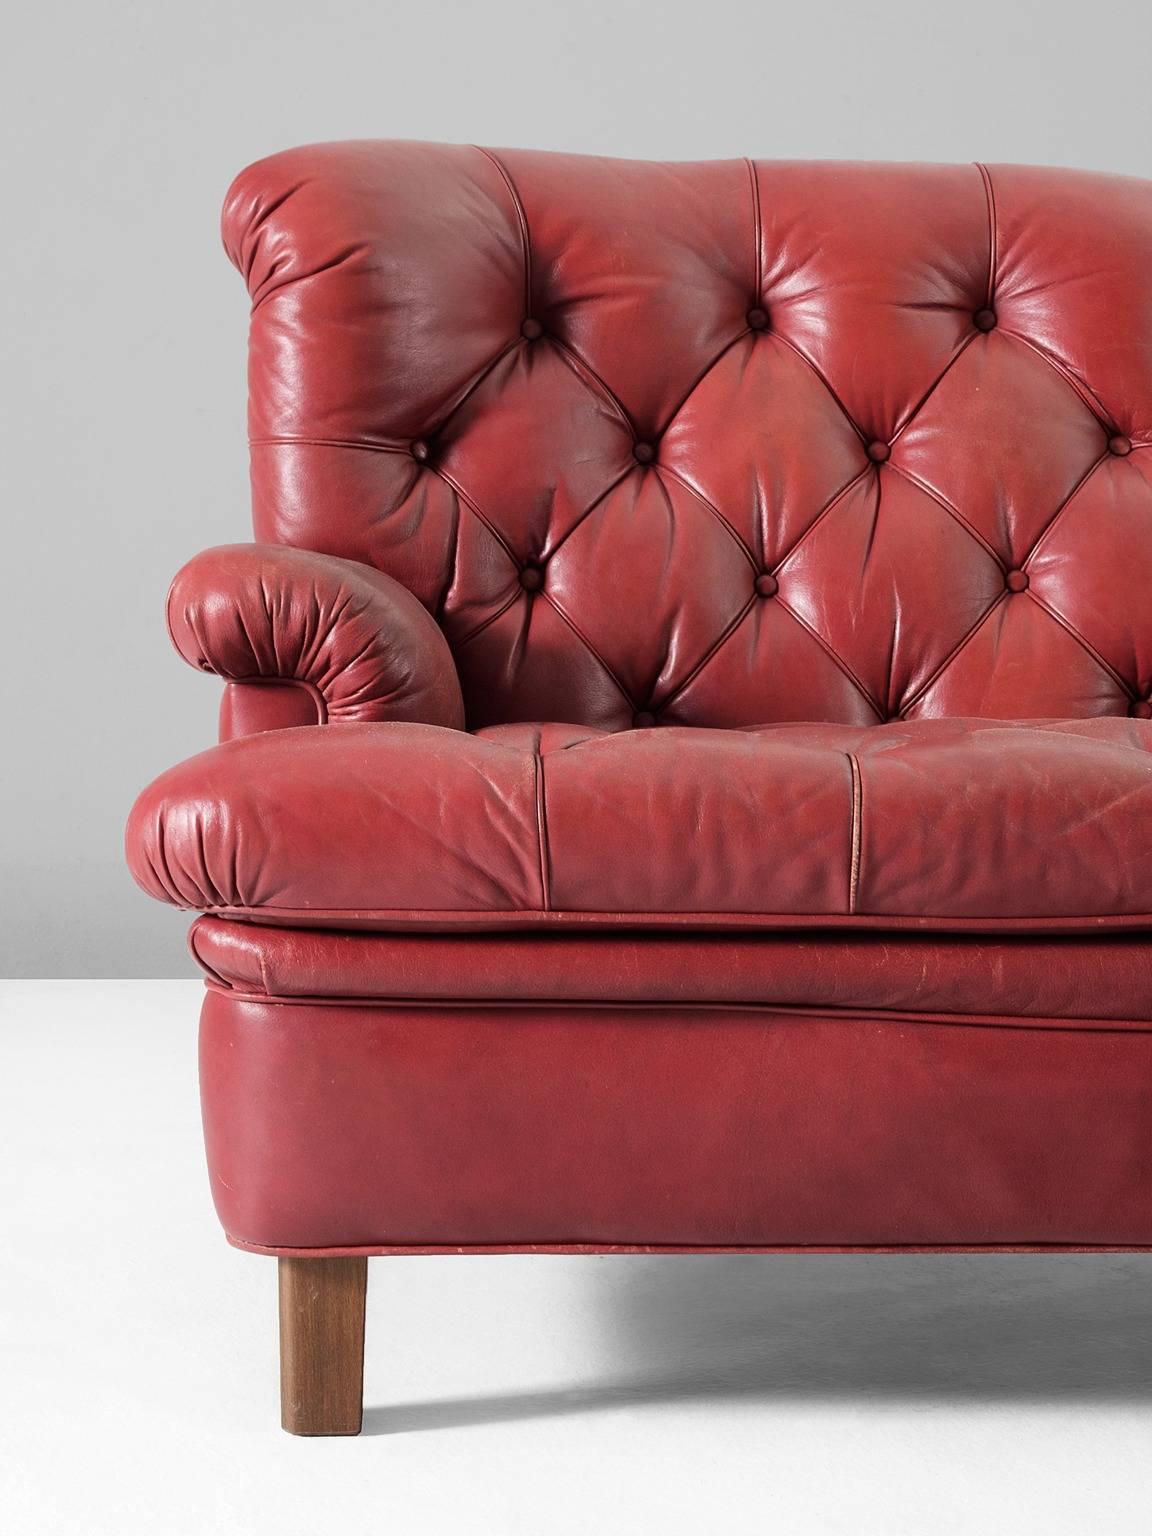 Mid-20th Century Arne Norell Three-Seat Sofa in Patinated Red Leather